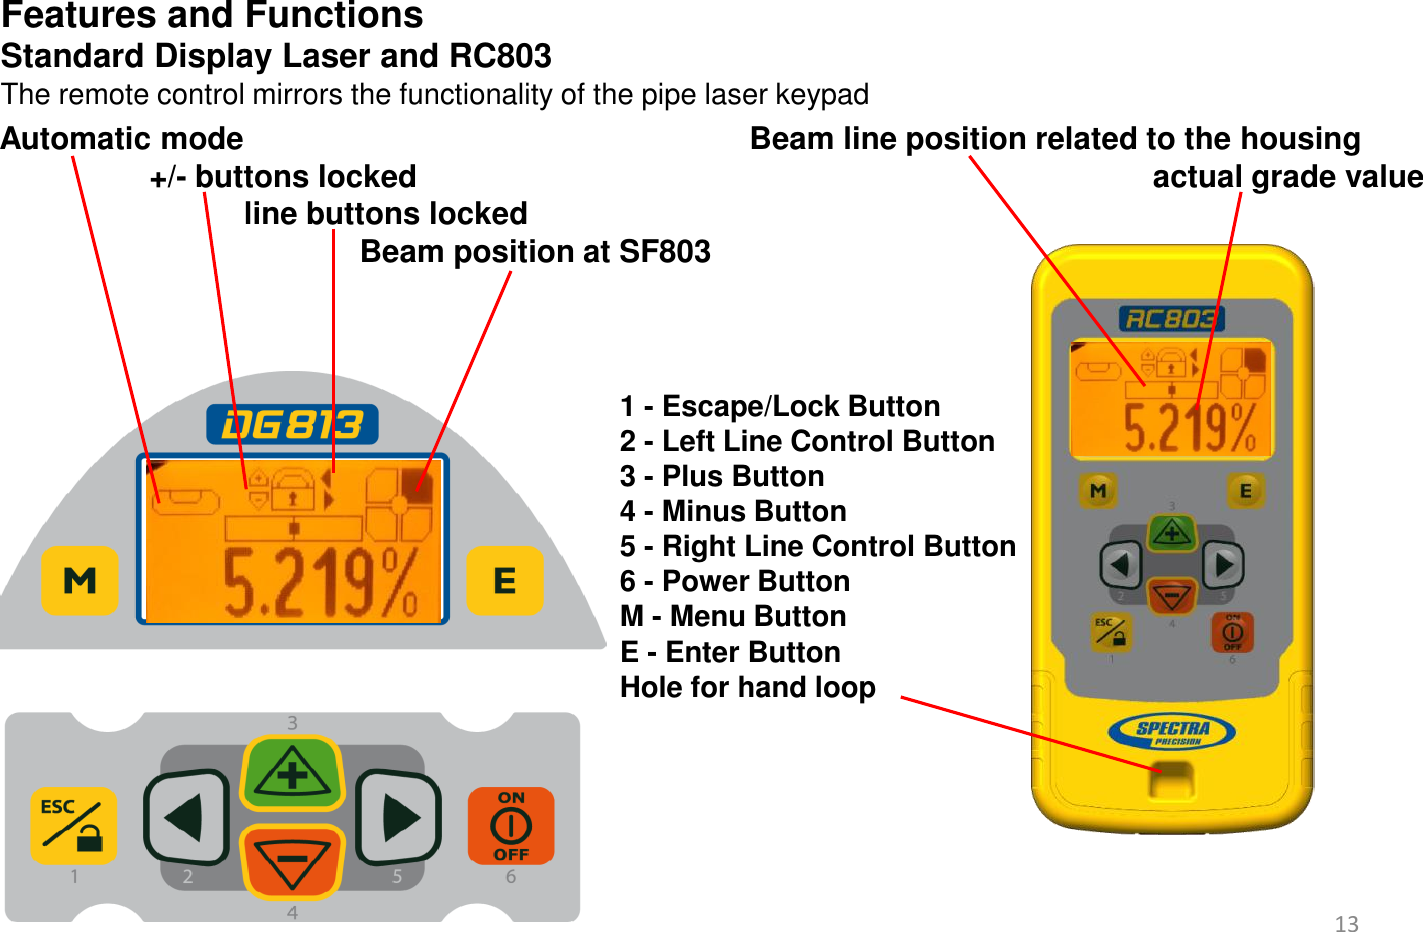 Features and Functions Standard Display Laser and RC803 The remote control mirrors the functionality of the pipe laser keypad 9 13 Automatic mode        Beam line position related to the housing   +/- buttons locked                      actual grade value              line buttons locked                  Beam position at SF803             1 - Escape/Lock Button  2 - Left Line Control Button  3 - Plus Button  4 - Minus Button  5 - Right Line Control Button  6 - Power Button M - Menu Button E - Enter Button Hole for hand loop       